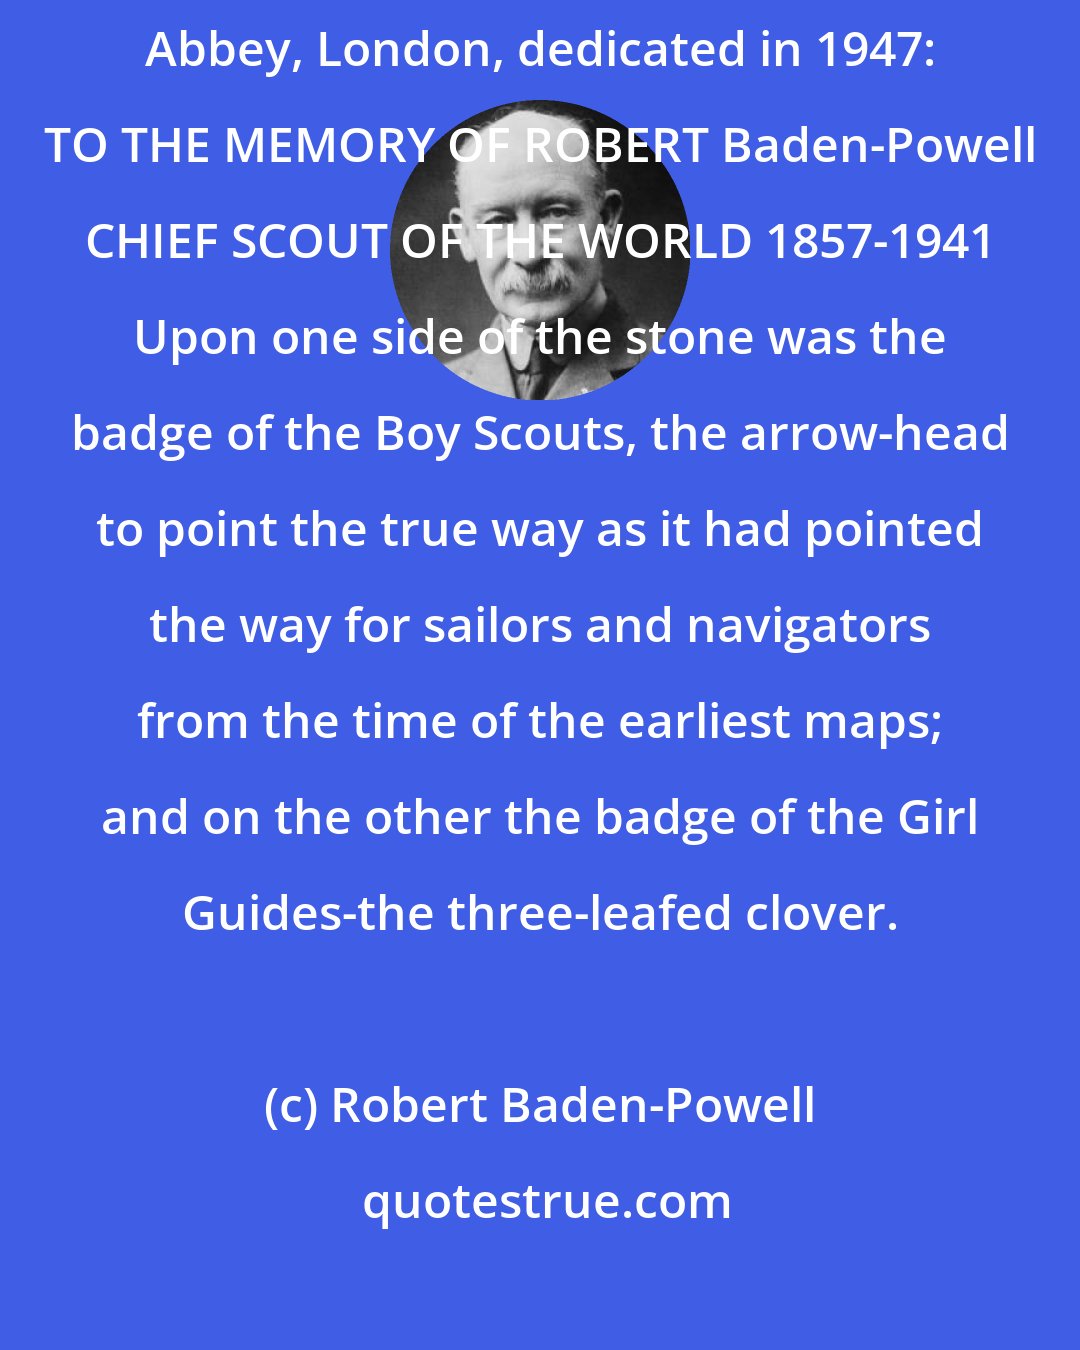 Robert Baden-Powell: Commemorative stone in the floor of the Chapel of St. George in Westminster Abbey, London, dedicated in 1947: TO THE MEMORY OF ROBERT Baden-Powell CHIEF SCOUT OF THE WORLD 1857-1941 Upon one side of the stone was the badge of the Boy Scouts, the arrow-head to point the true way as it had pointed the way for sailors and navigators from the time of the earliest maps; and on the other the badge of the Girl Guides-the three-leafed clover.